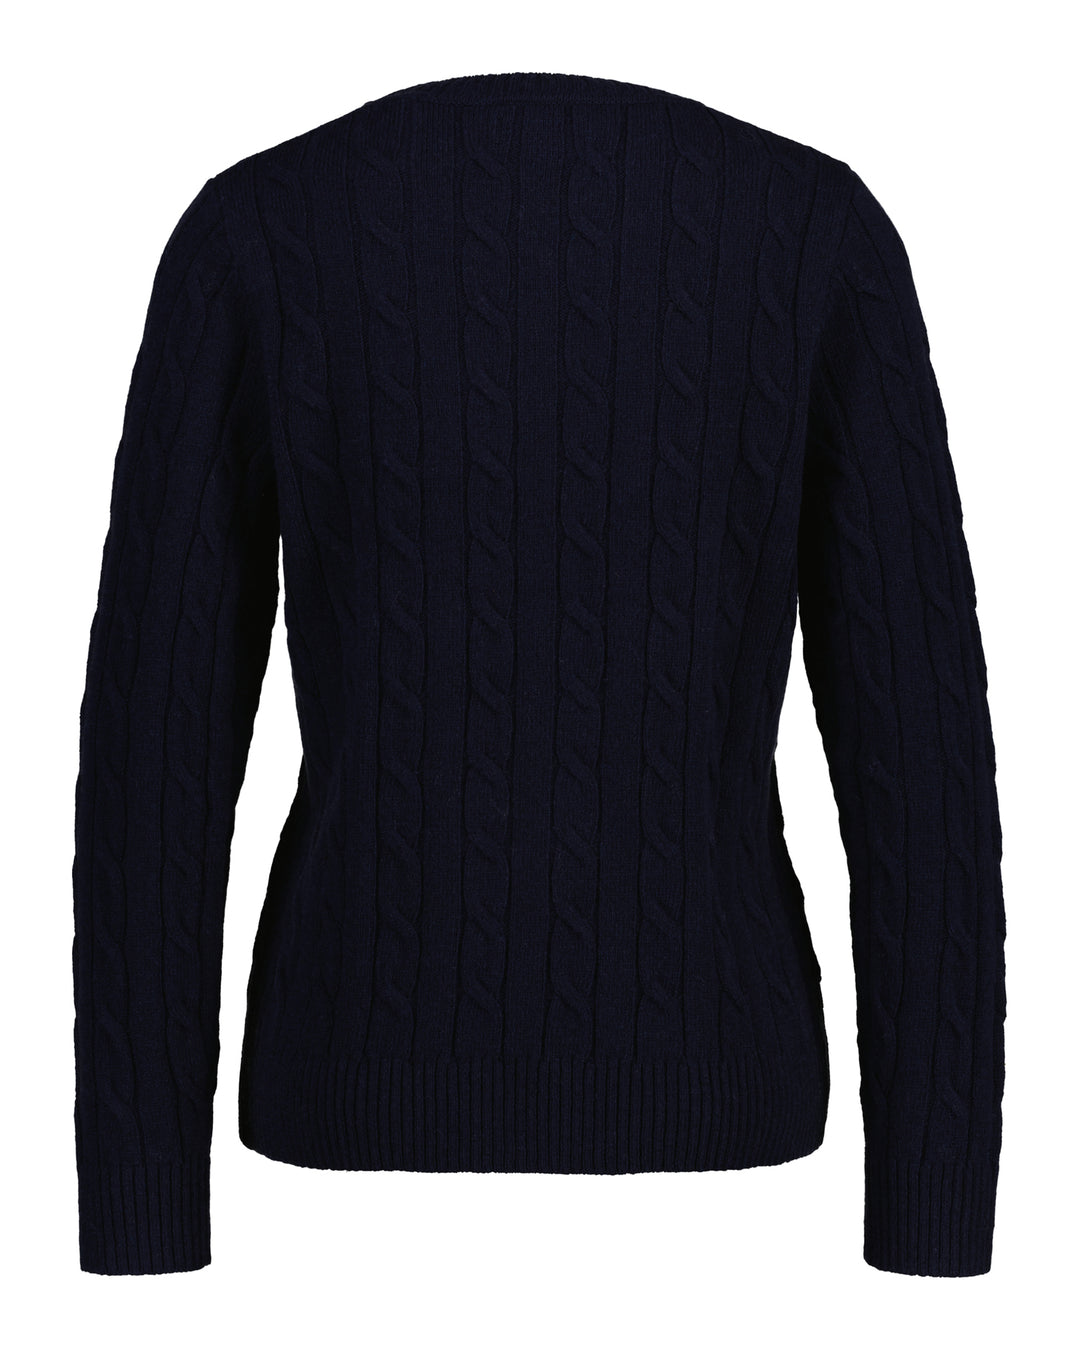 GANT Lambswool Cable C-Neck/Pulover 4805200